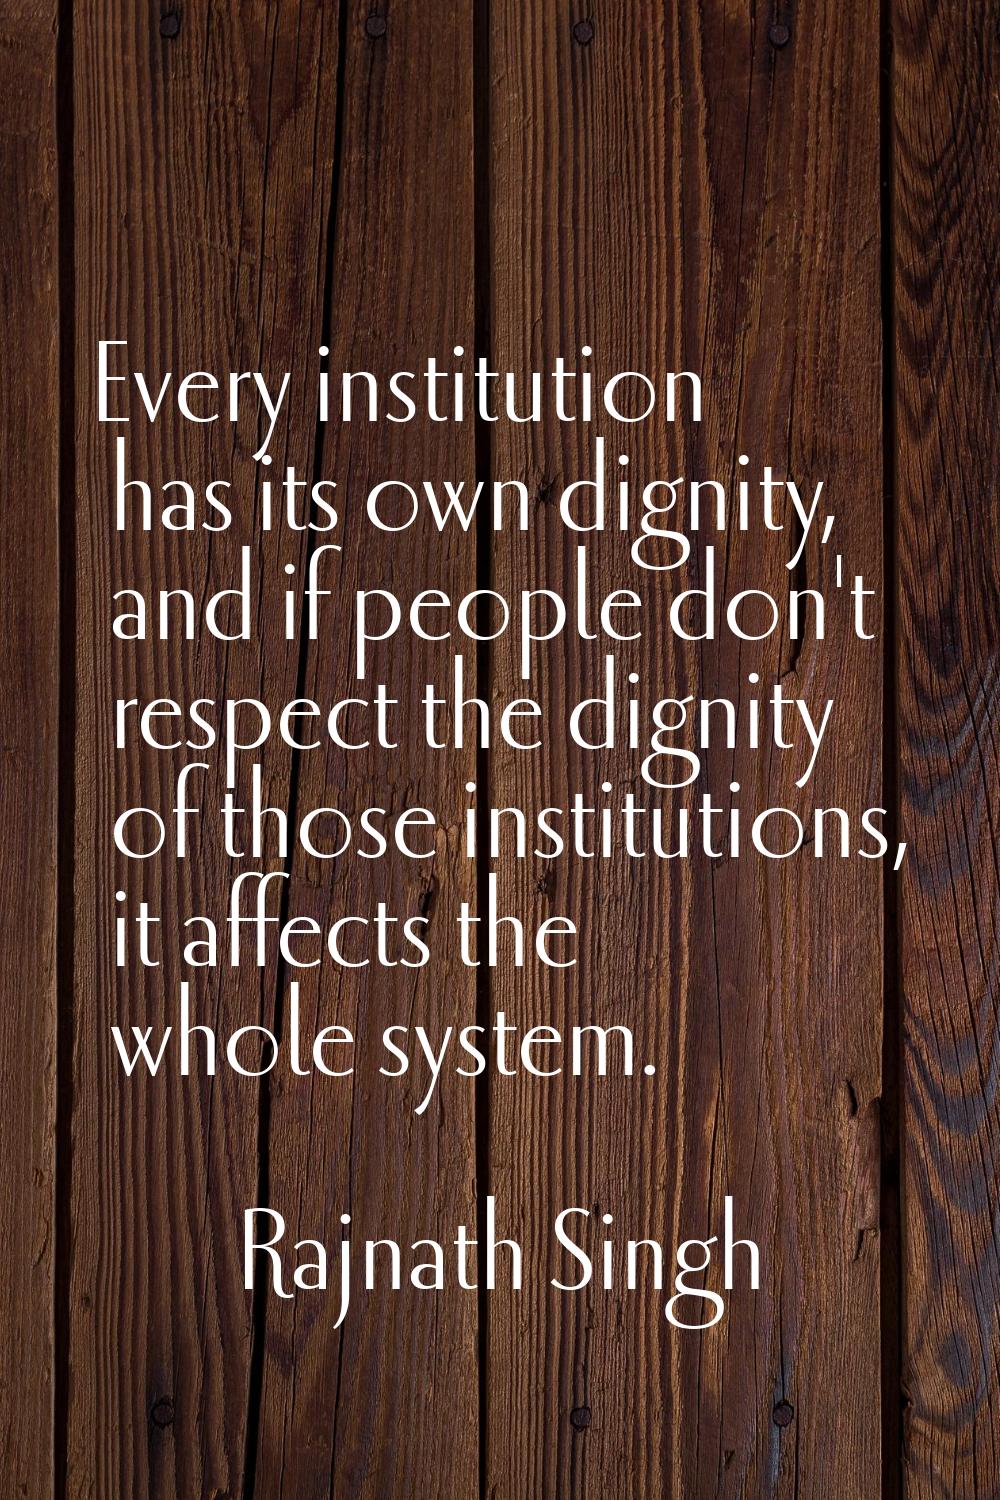 Every institution has its own dignity, and if people don't respect the dignity of those institution